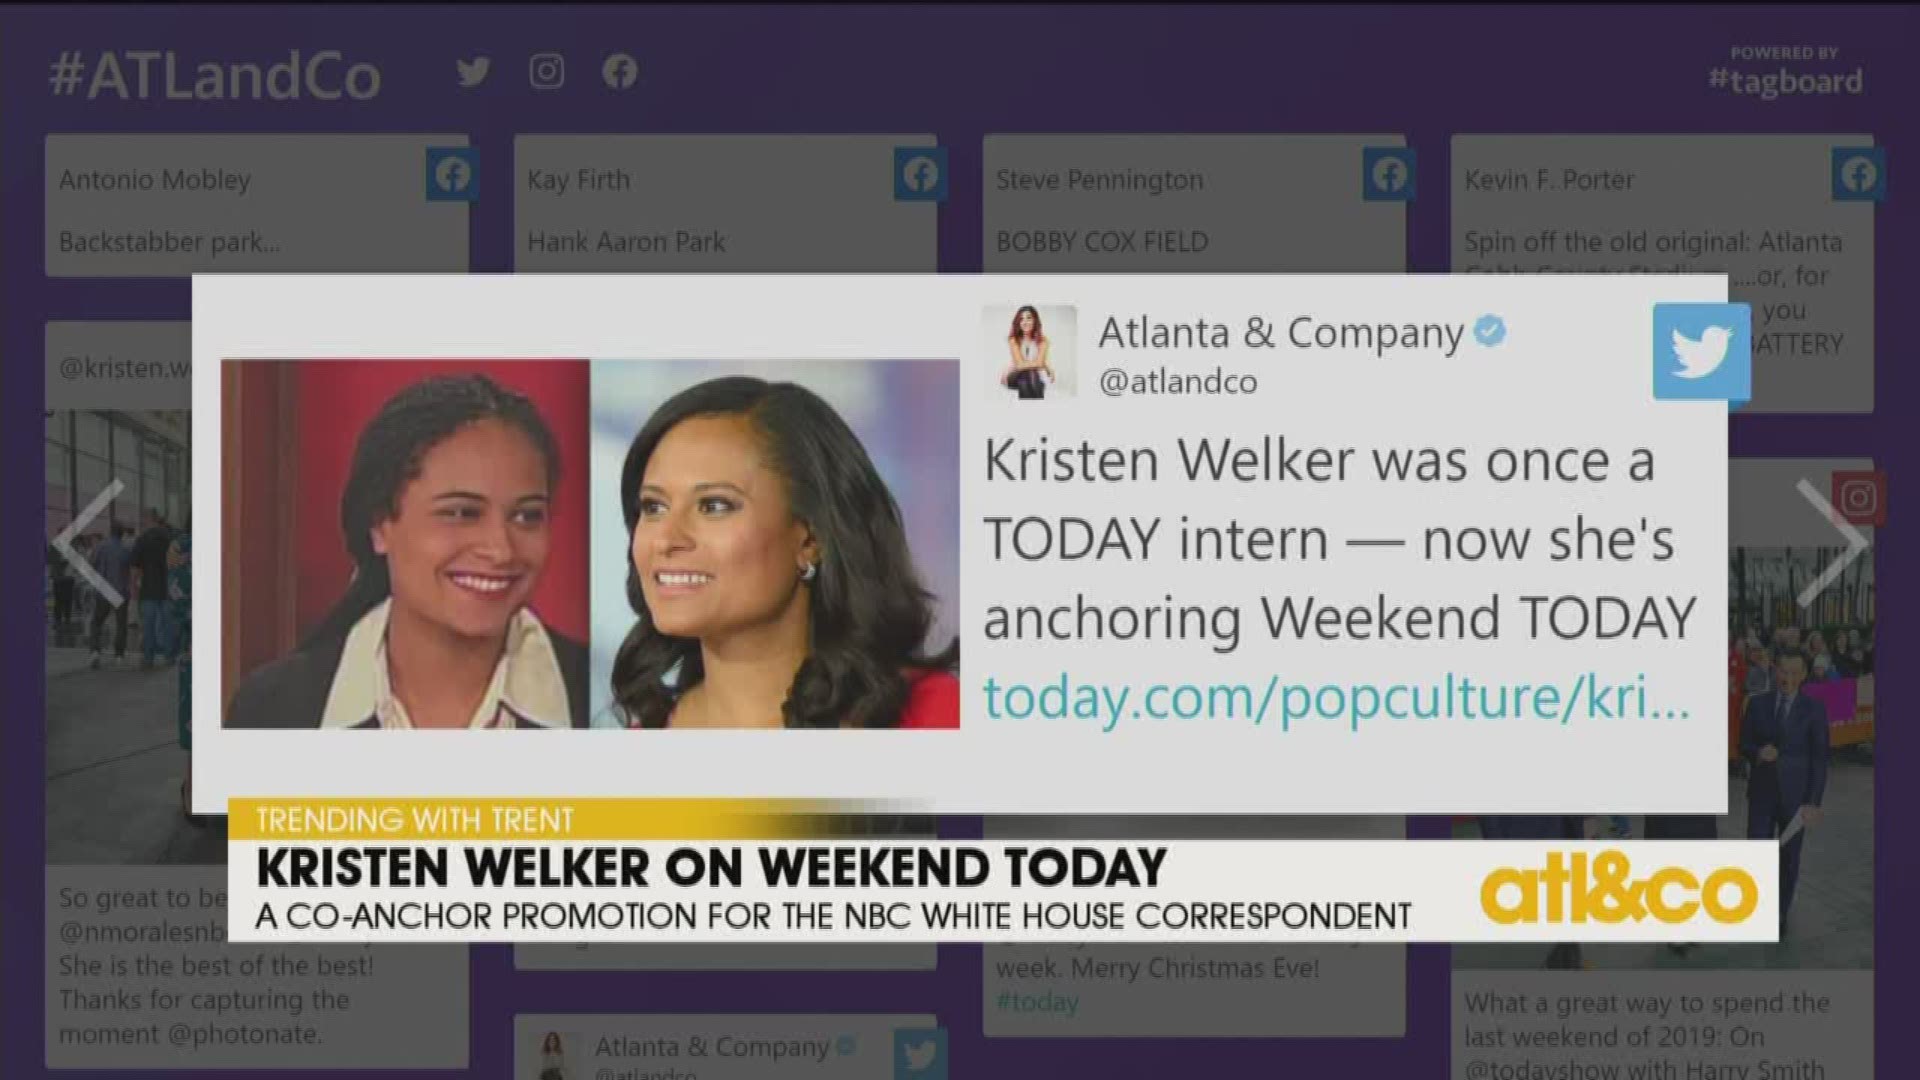 NBC White House correspondent Kristen Welker joins Weekend TODAY as co-anchor, years after first interning at Studio 1A.